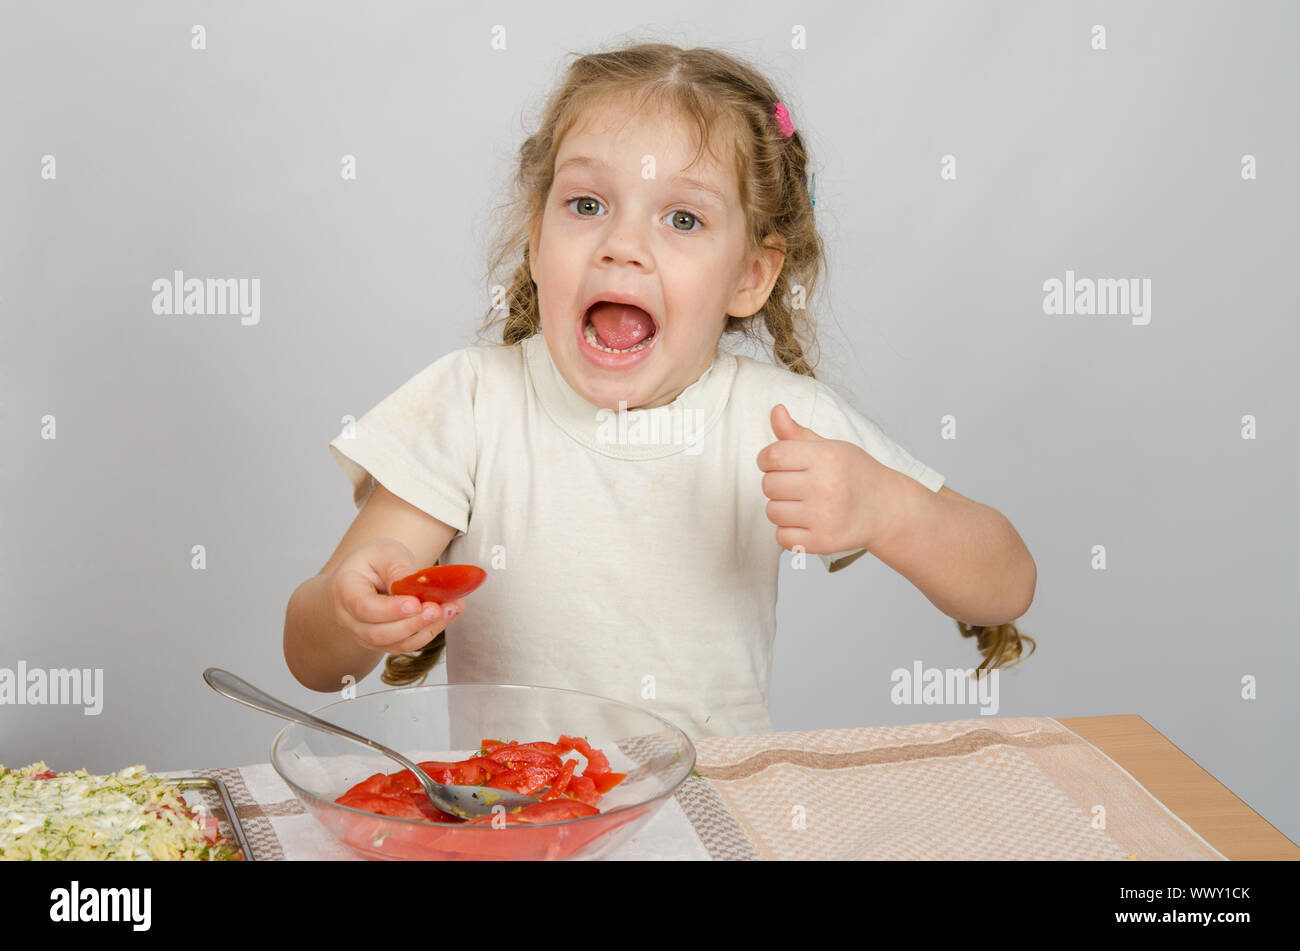 Little girl with mouth open holding a large slice of tomato Stock Photo